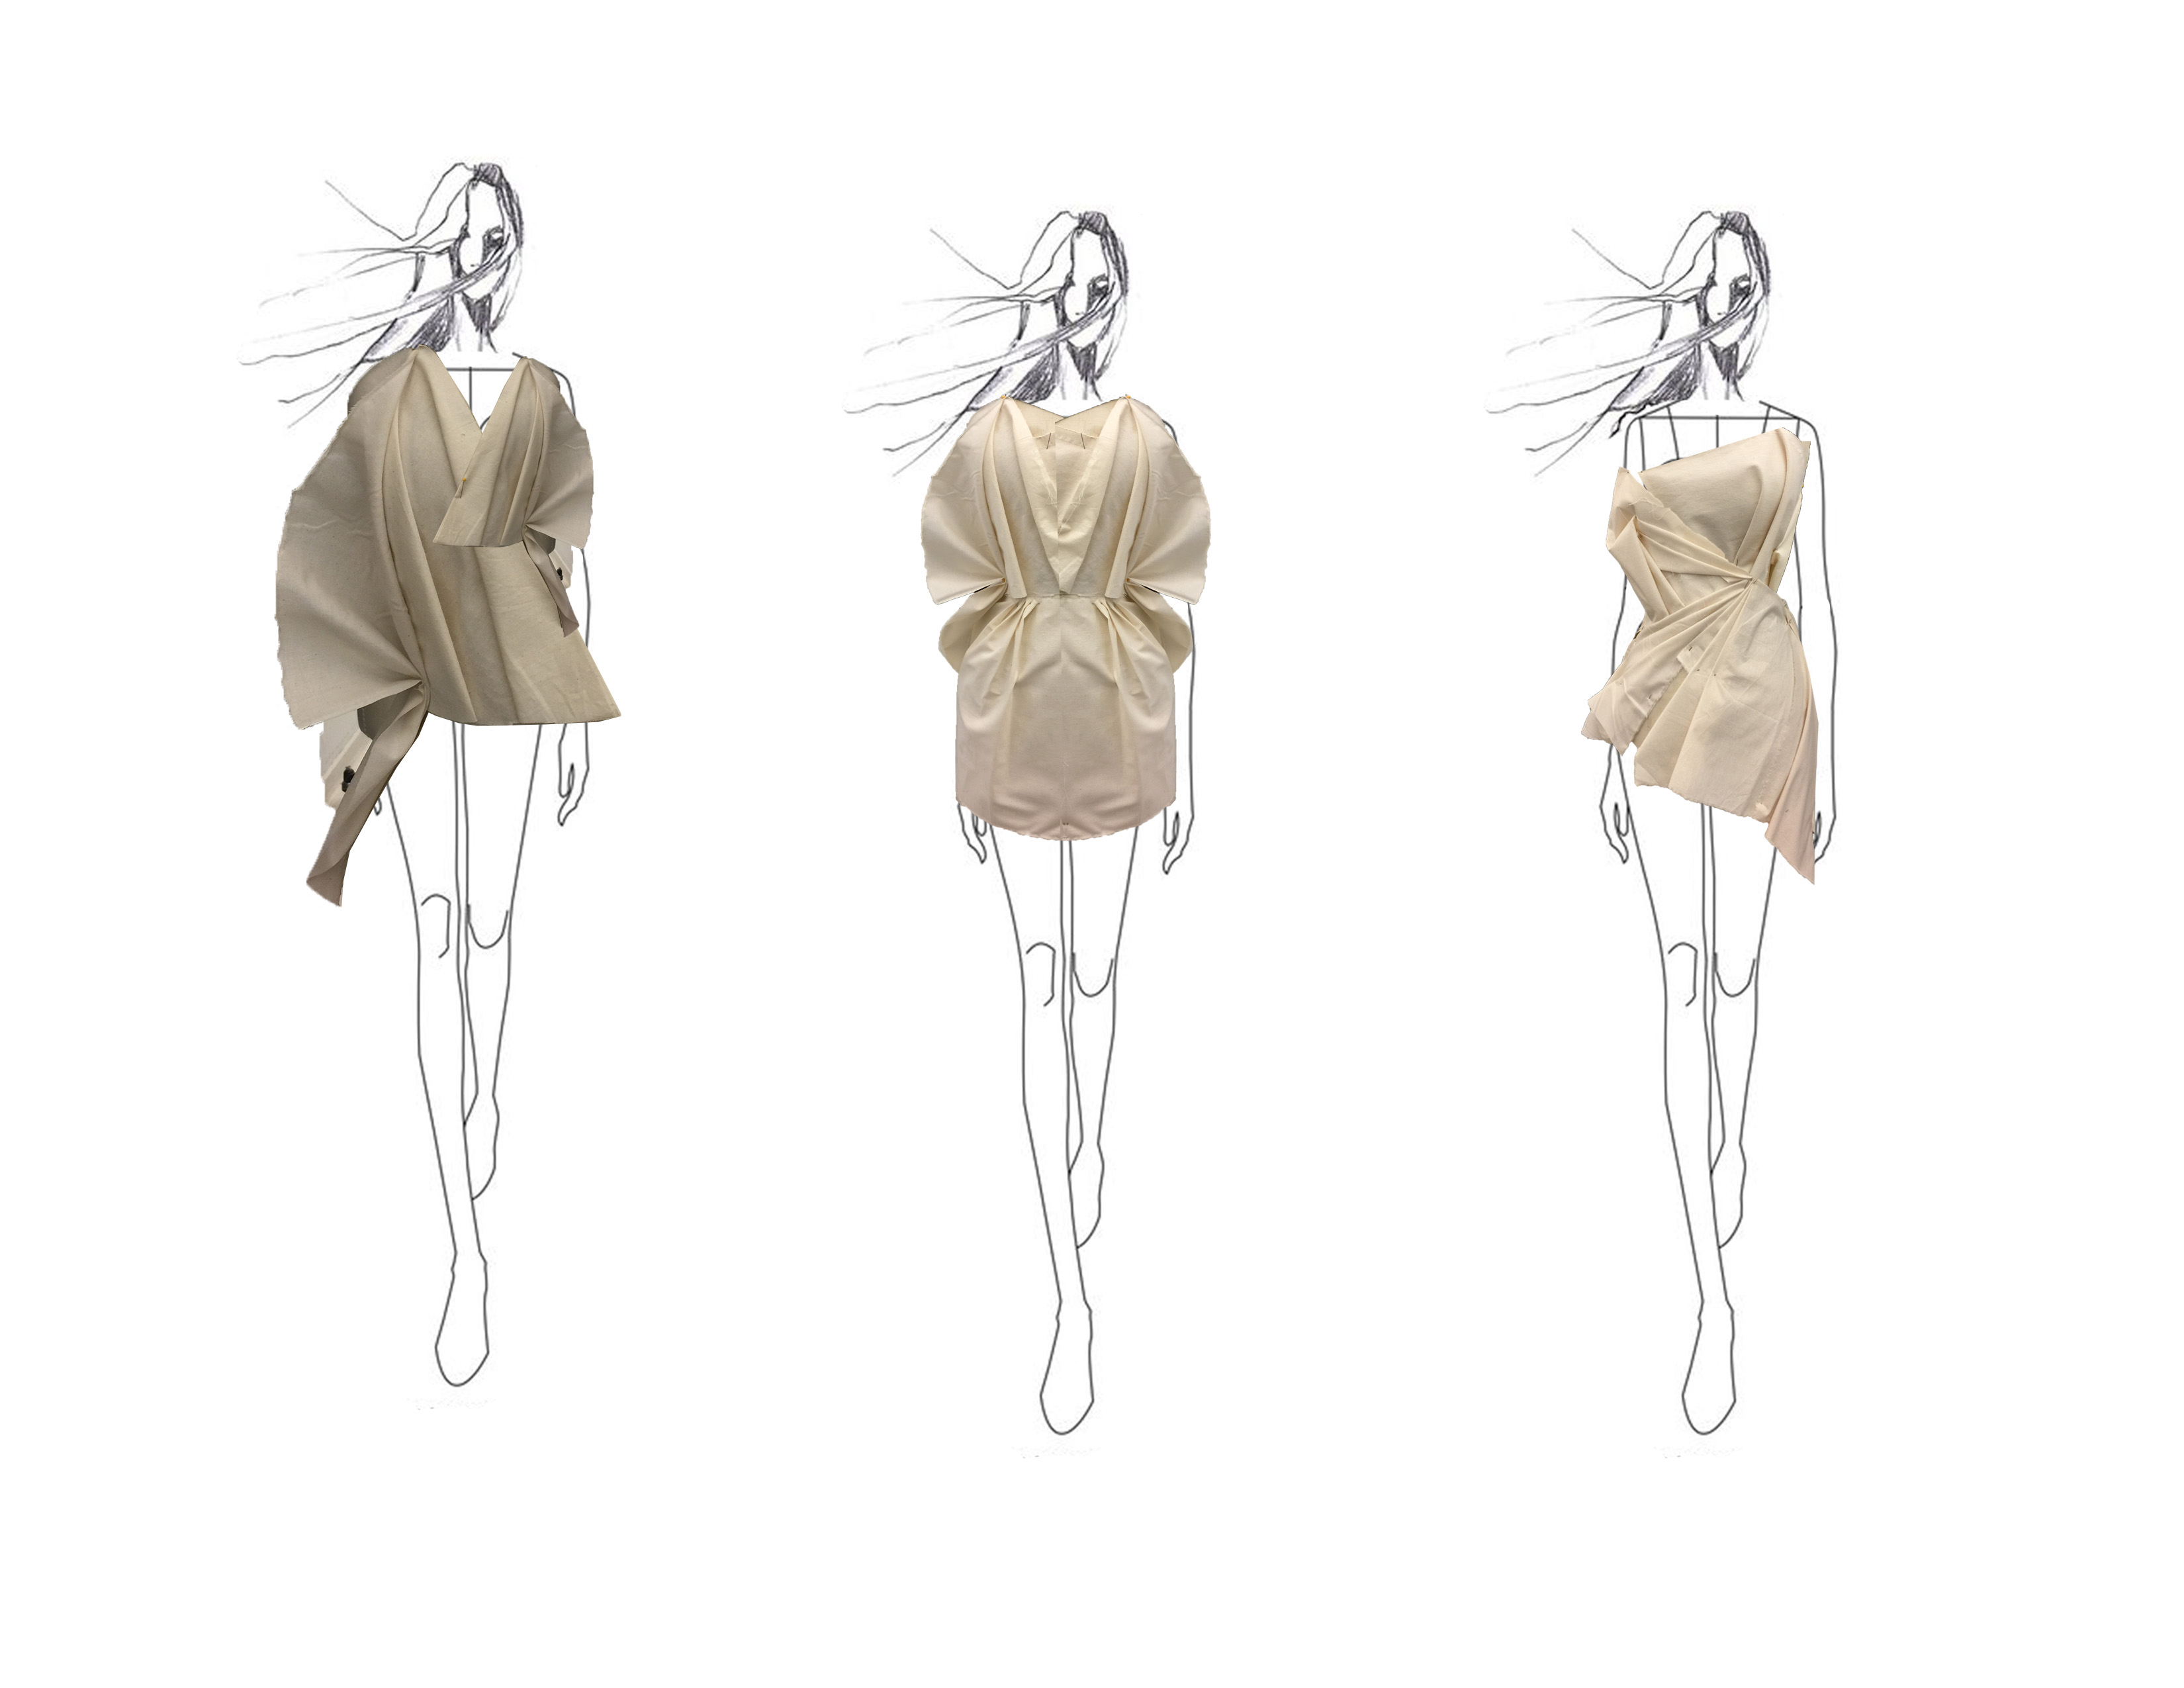 CTS2: Class Speed Draping and Sketches